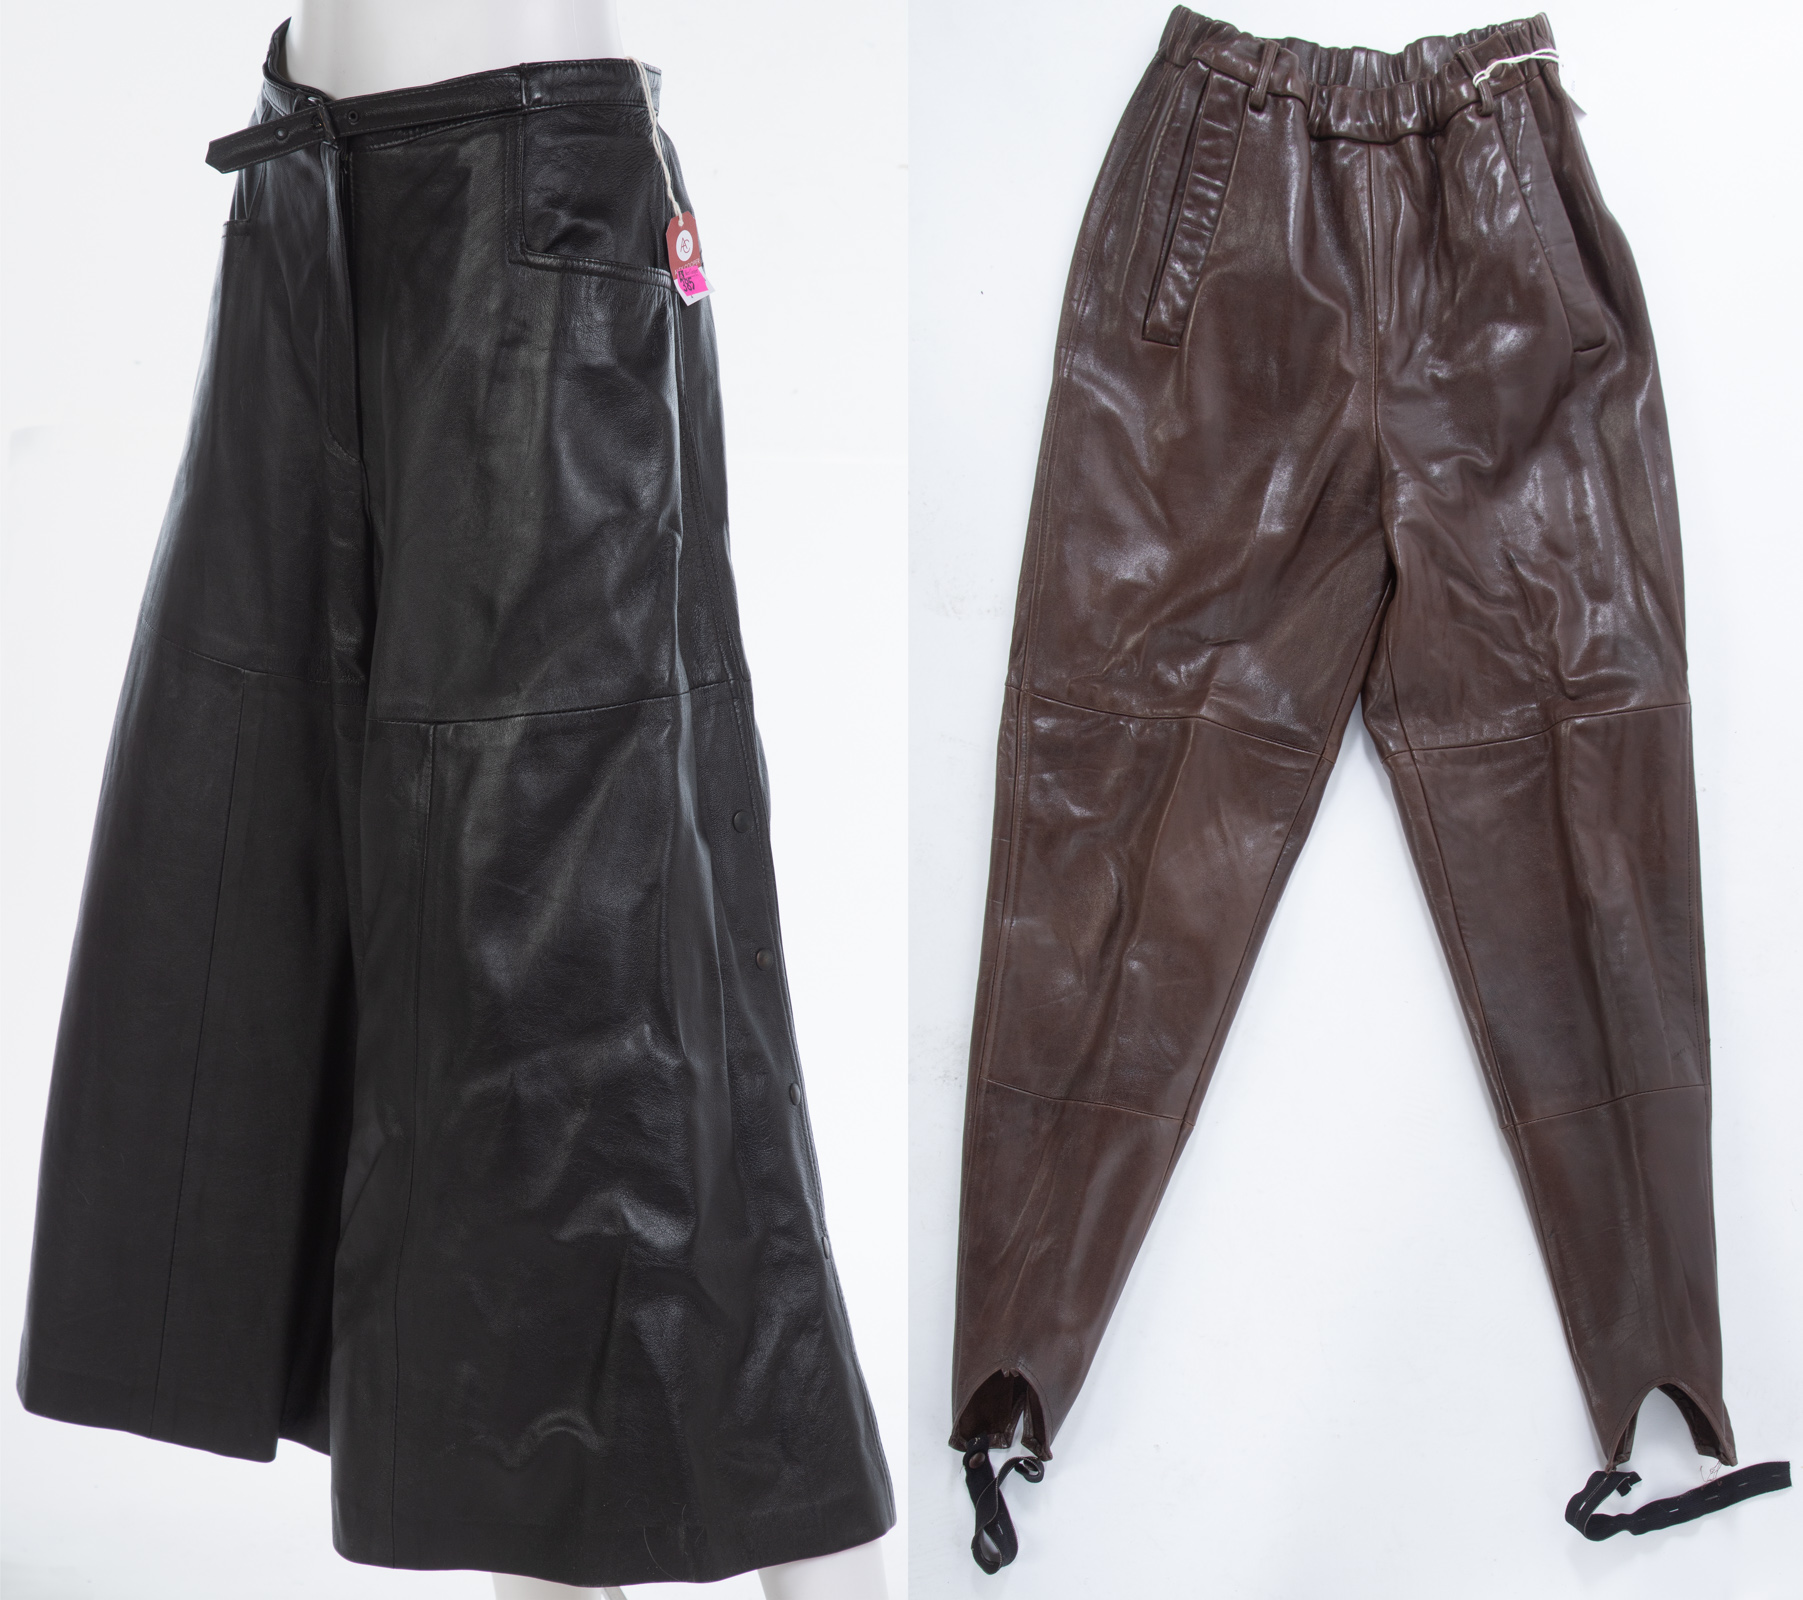 TWO PAIRS OF LEATHER PANTS Includes